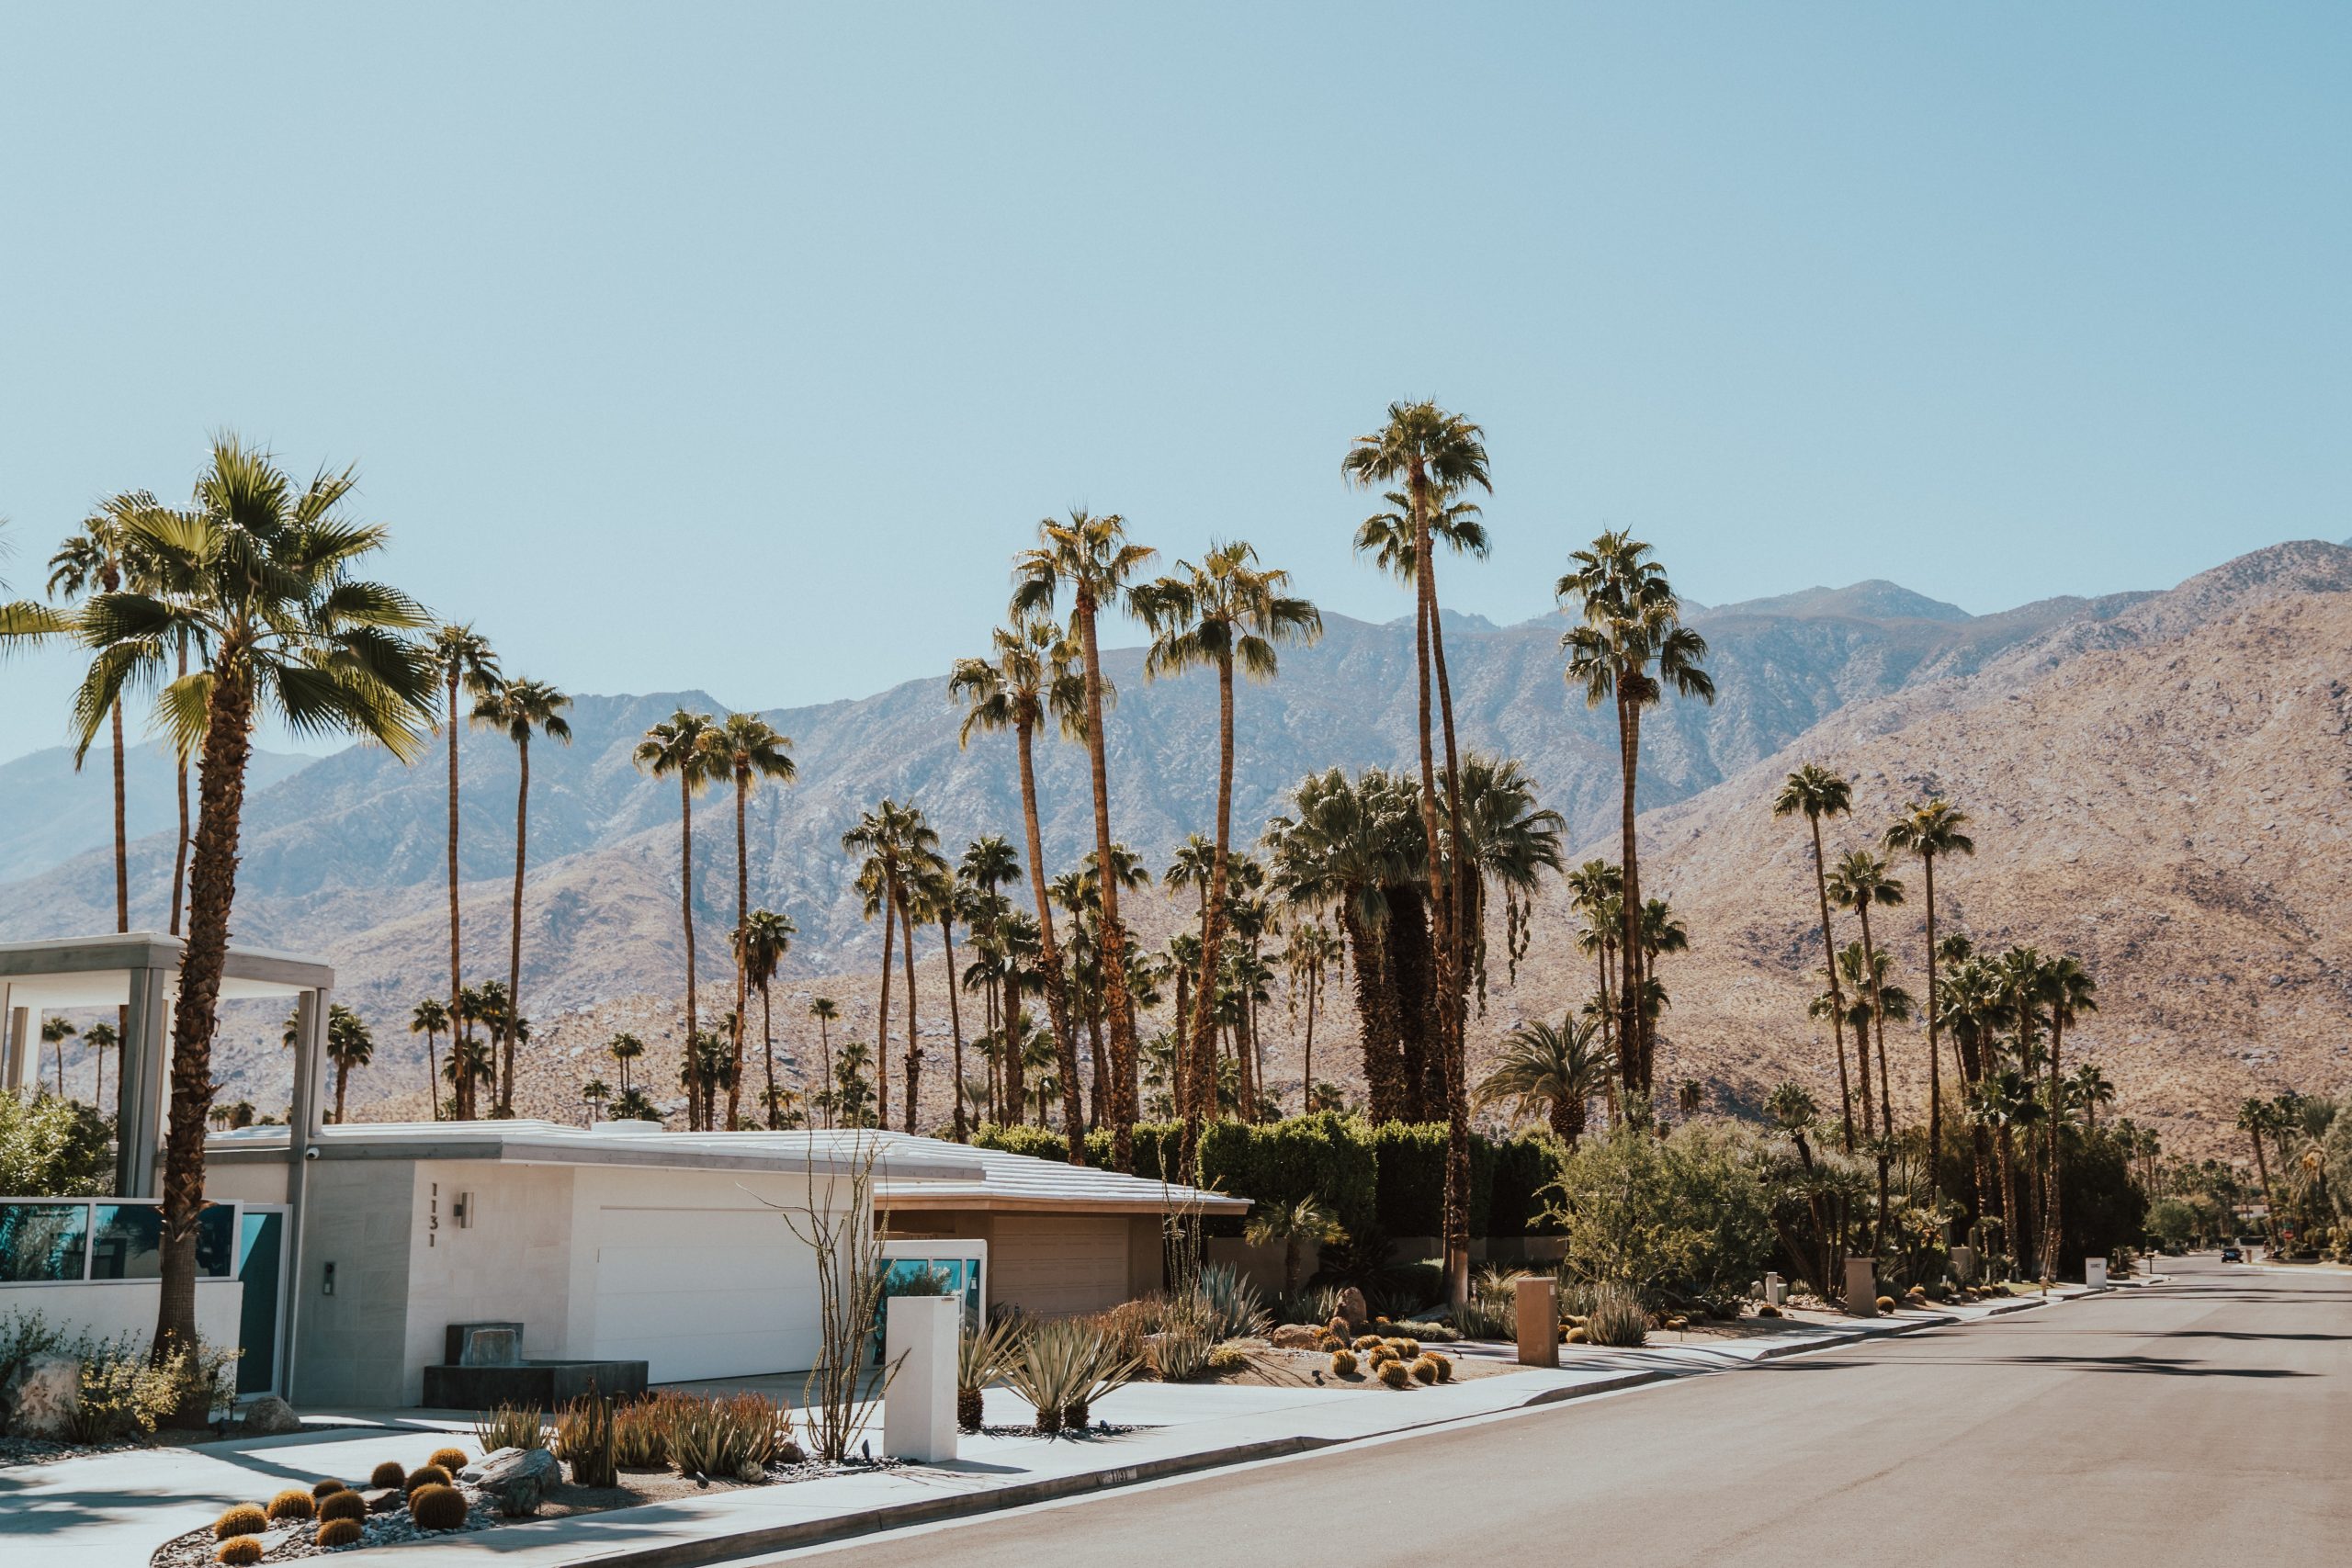 48 Hours In Palm Springs